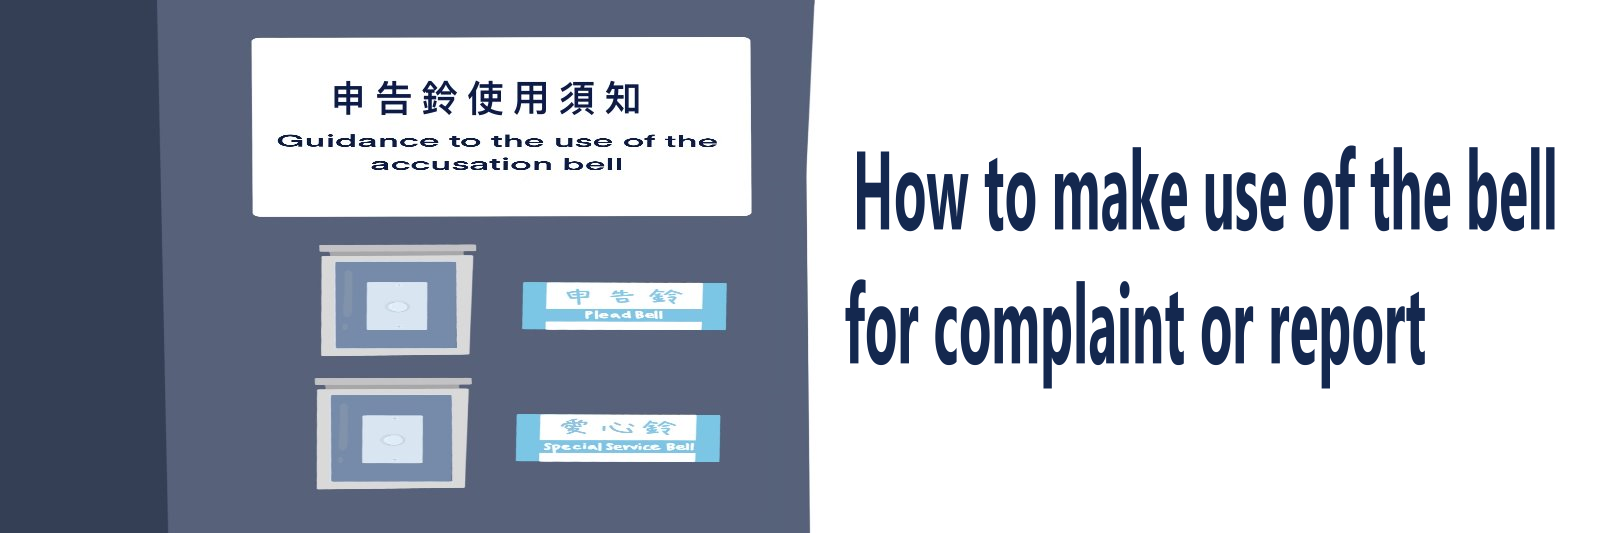 How to make use of the bell for complaint or report